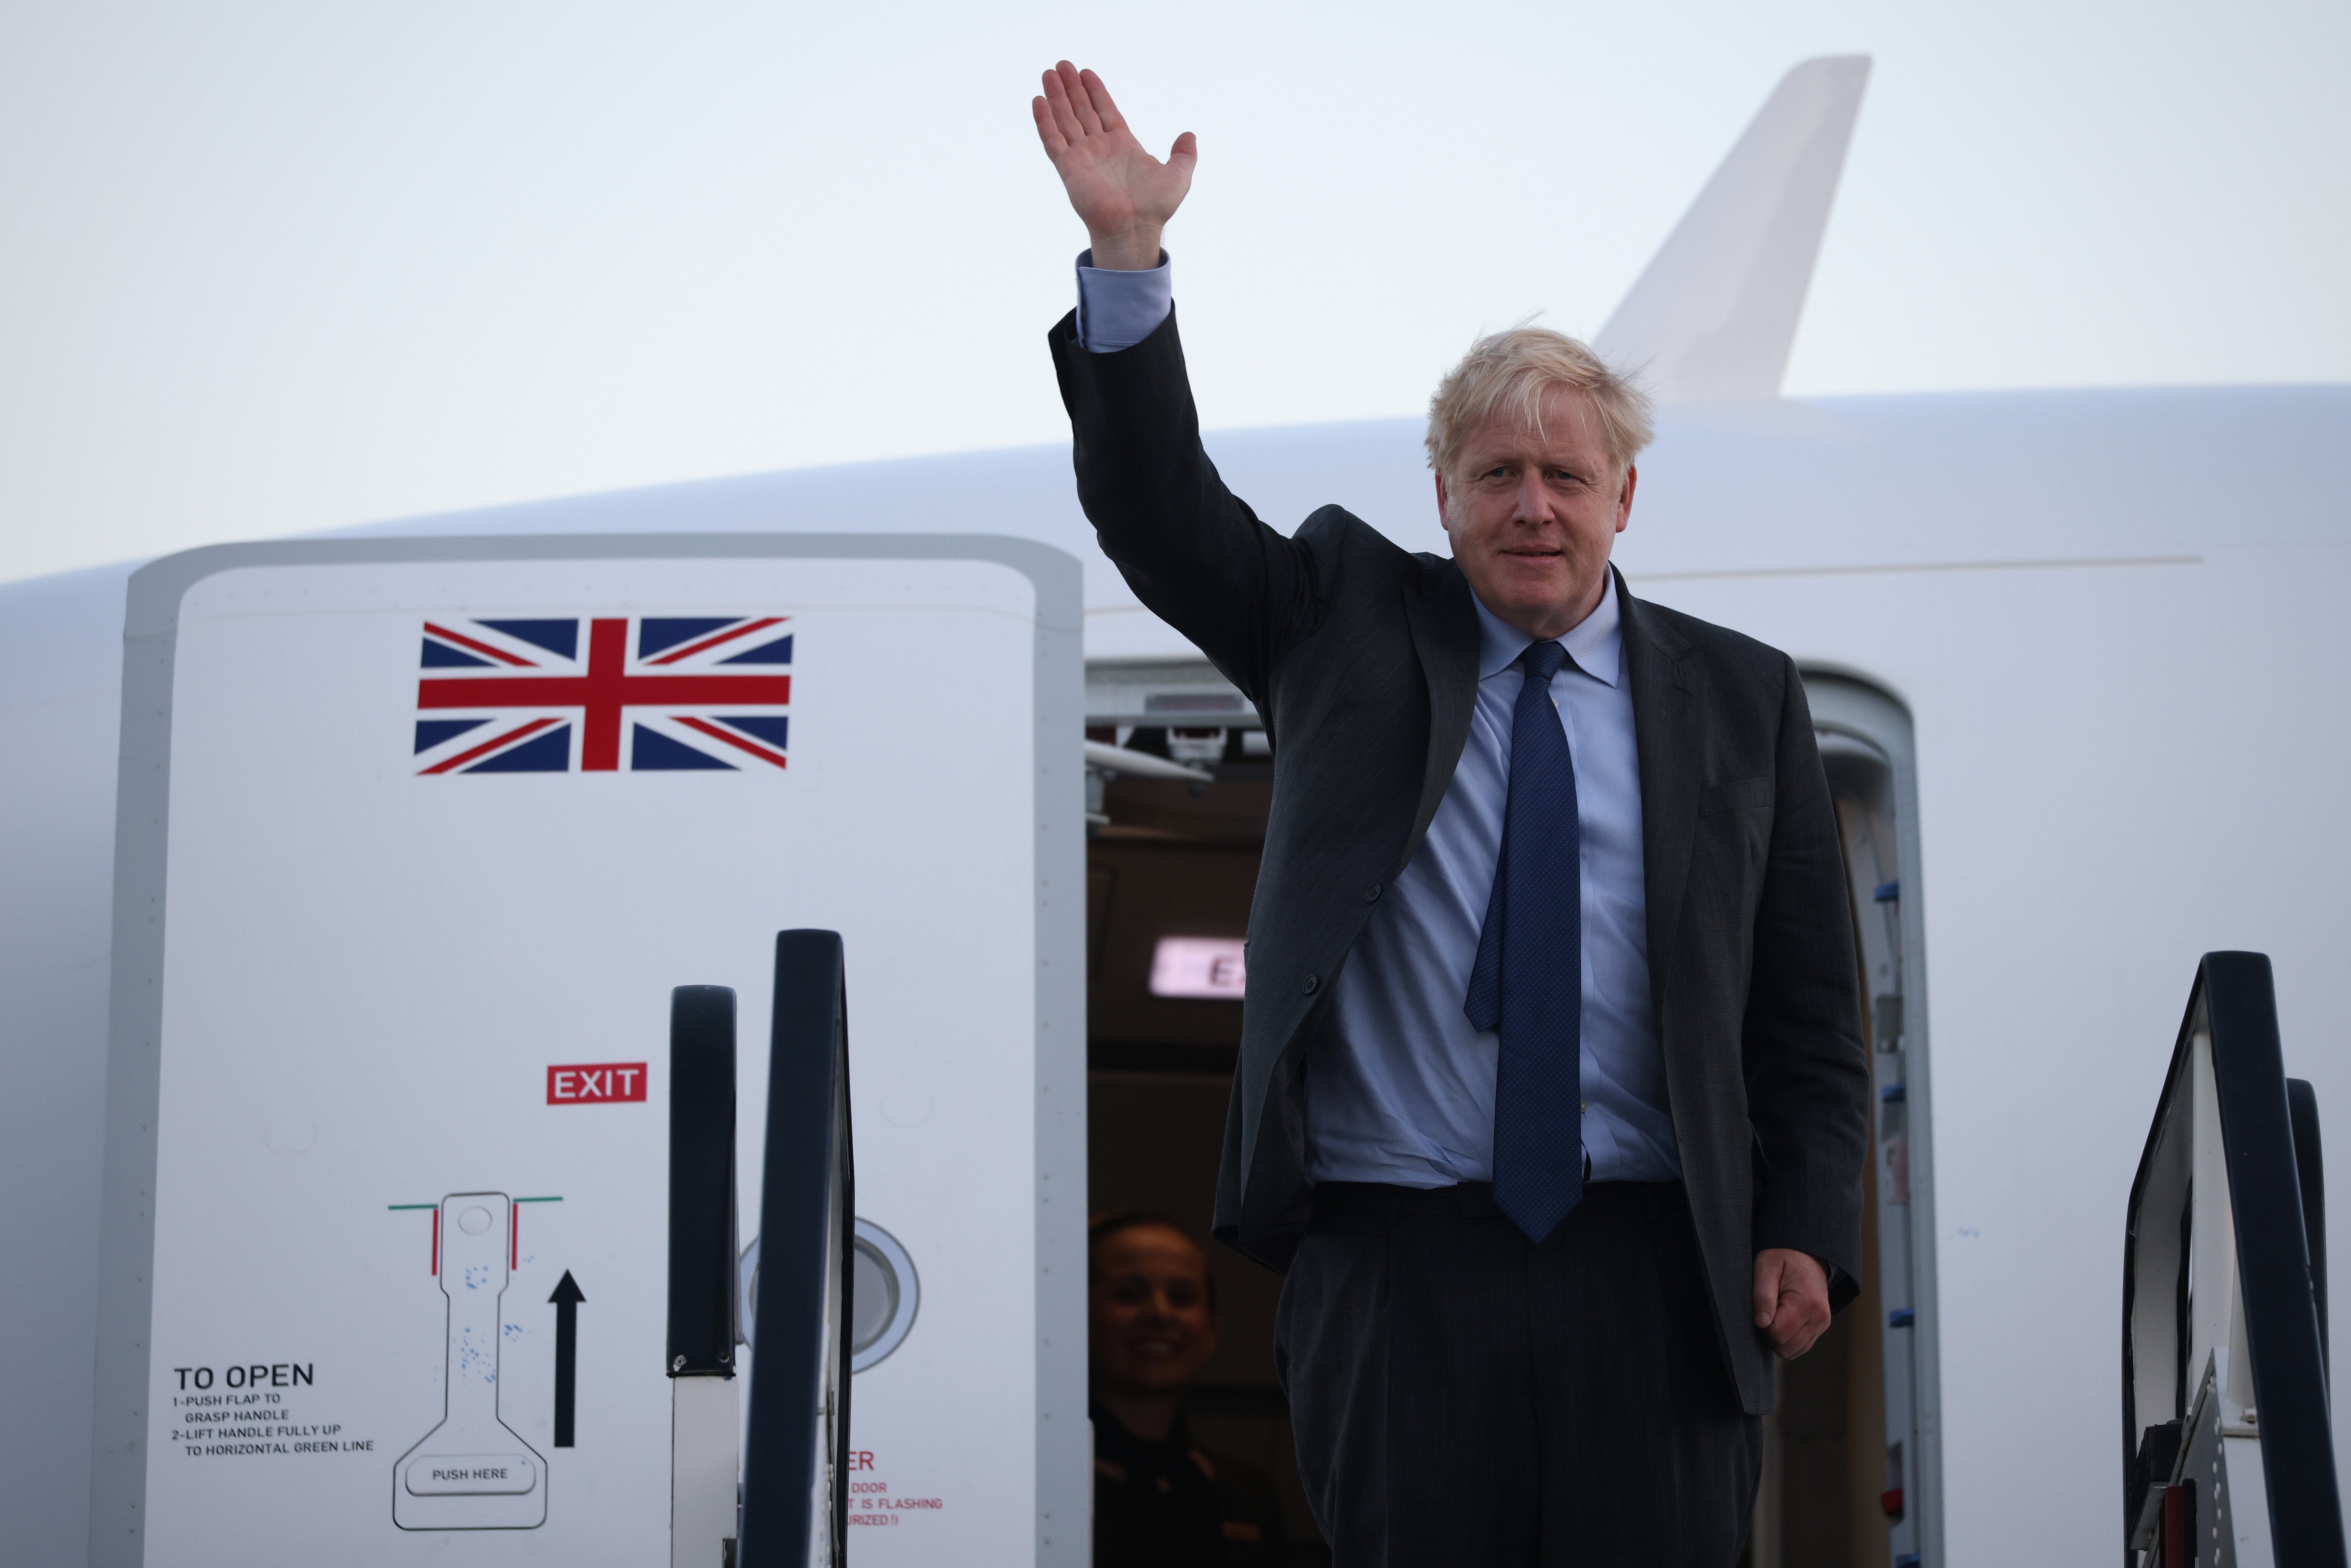 Boris Johnson has previously been accused of ‘staggering hypocrisy’ over his use the government plane for short trips despite Britain’s climate commitments